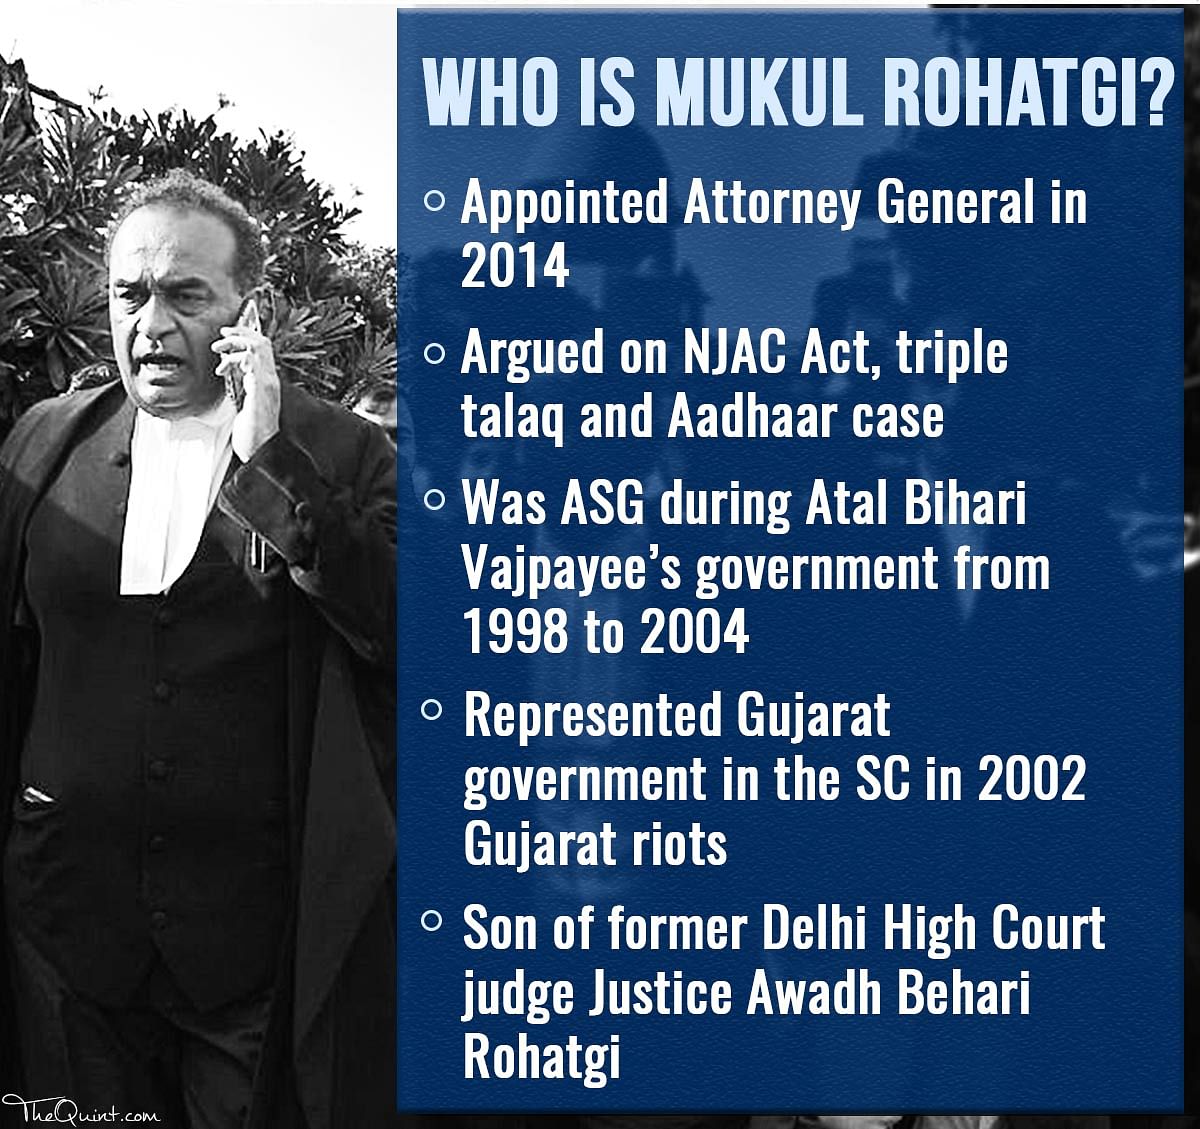 A look at Mukul Rohatgi’s landmark cases, conflict of interest & changing role of AG indicate reasons for his exit. 